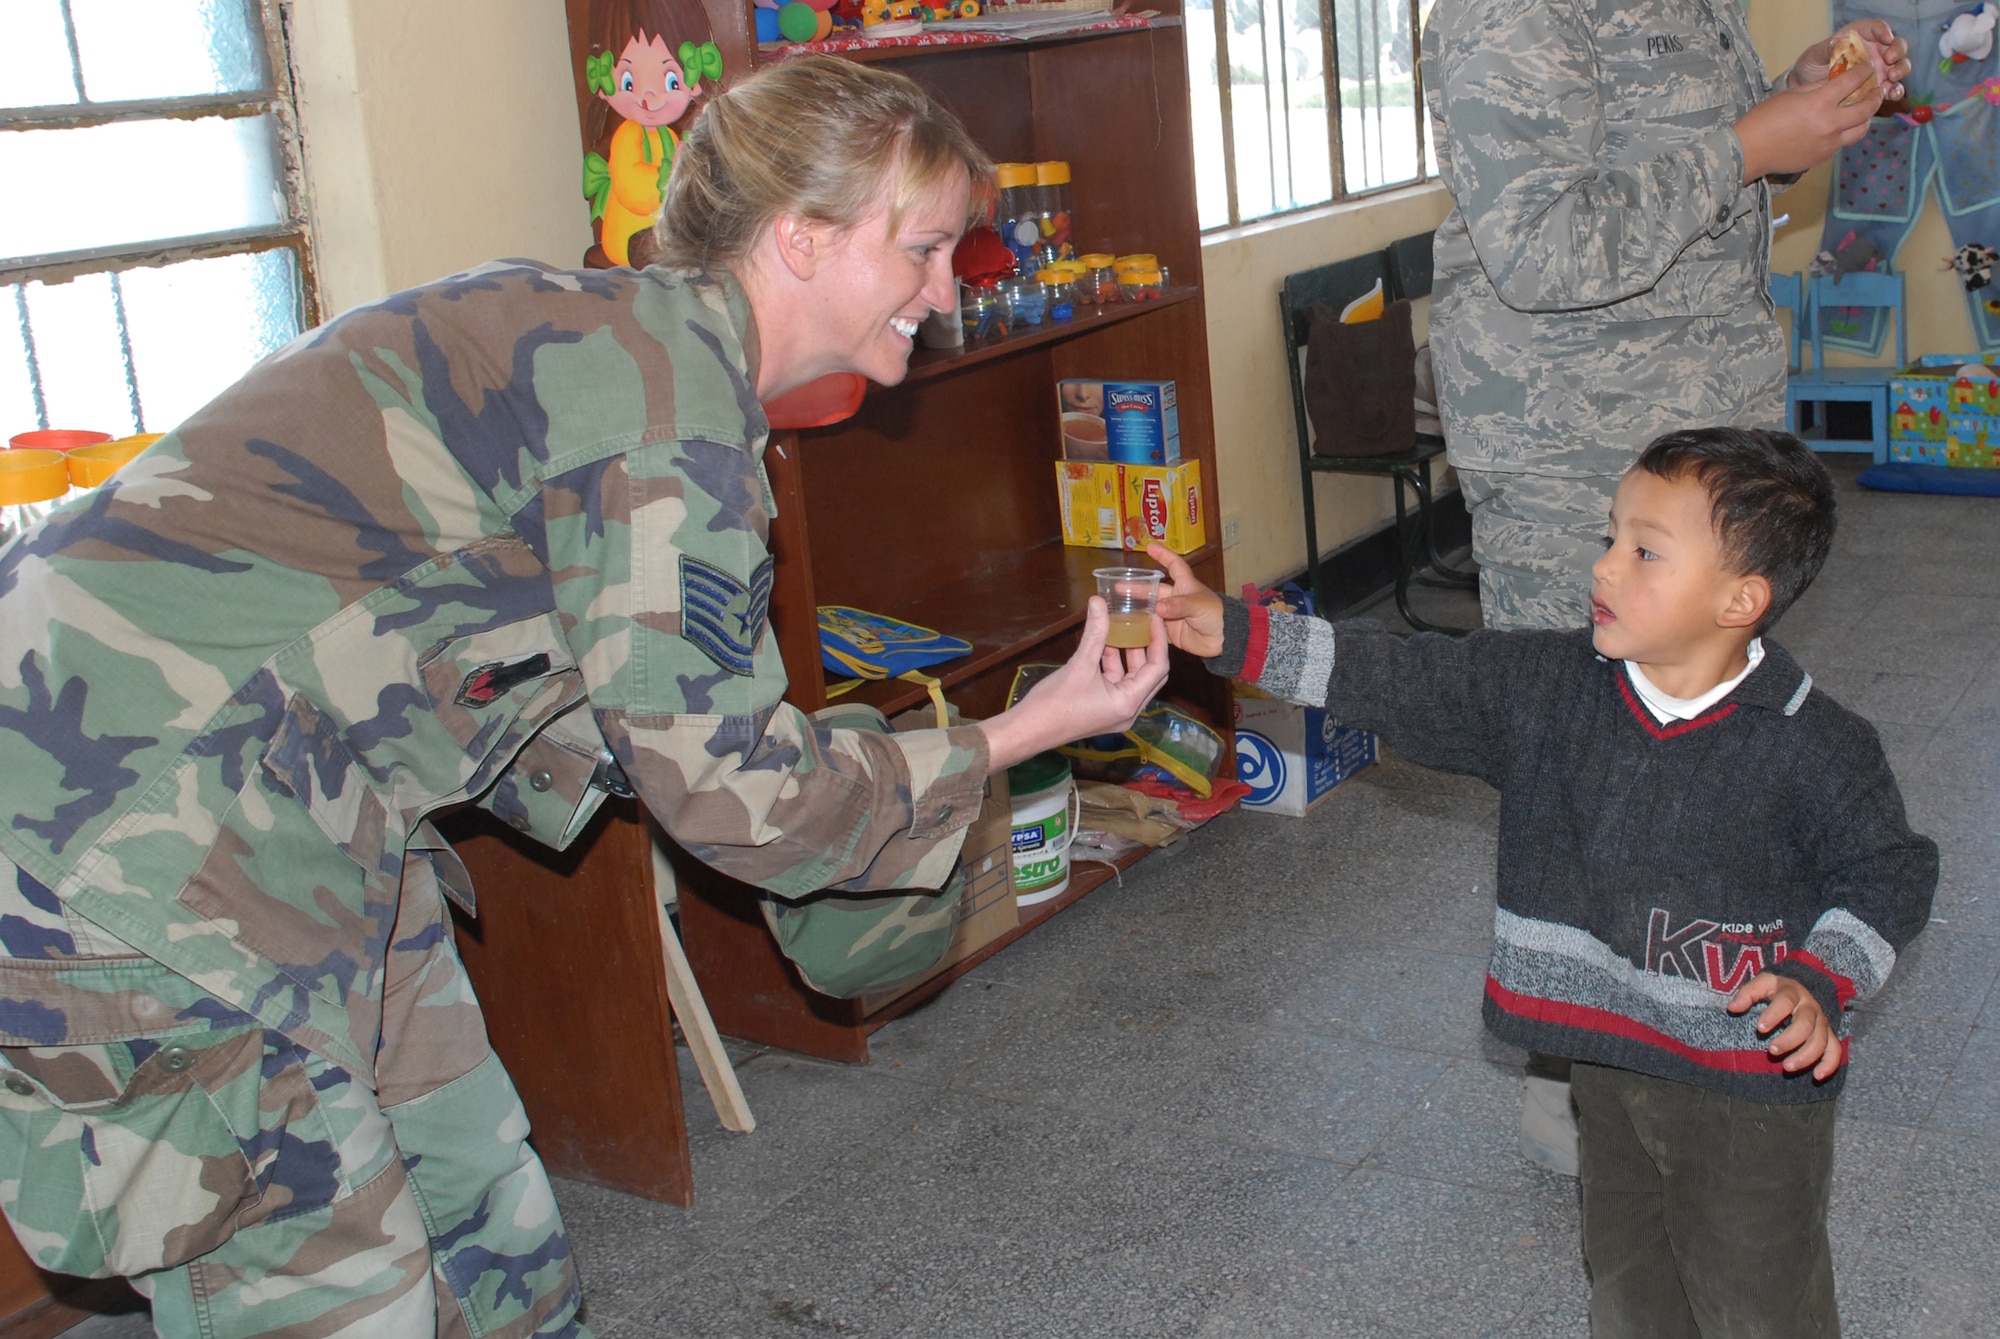 Tech. Sgt. Cari Gebbia, a paralegal deployed from the 12th Air Force Legal Office at Davis-Monthan Air Force Base, Ariz., accepts a cup of juice from Rodrigo Guillermo Marquina Baluarte, 3, during a visit to I.E. Inicial CRL. Miguel Peñarrieta Elementary School June 4 in Los Cabitos, Peru, the location where U.S. military members are based in support of New Horizons Peru 2008, a humanitarian event that benefits thousands of Peruvians. (U.S. Air Force photo/Airman 1st Class Tracie Forte)